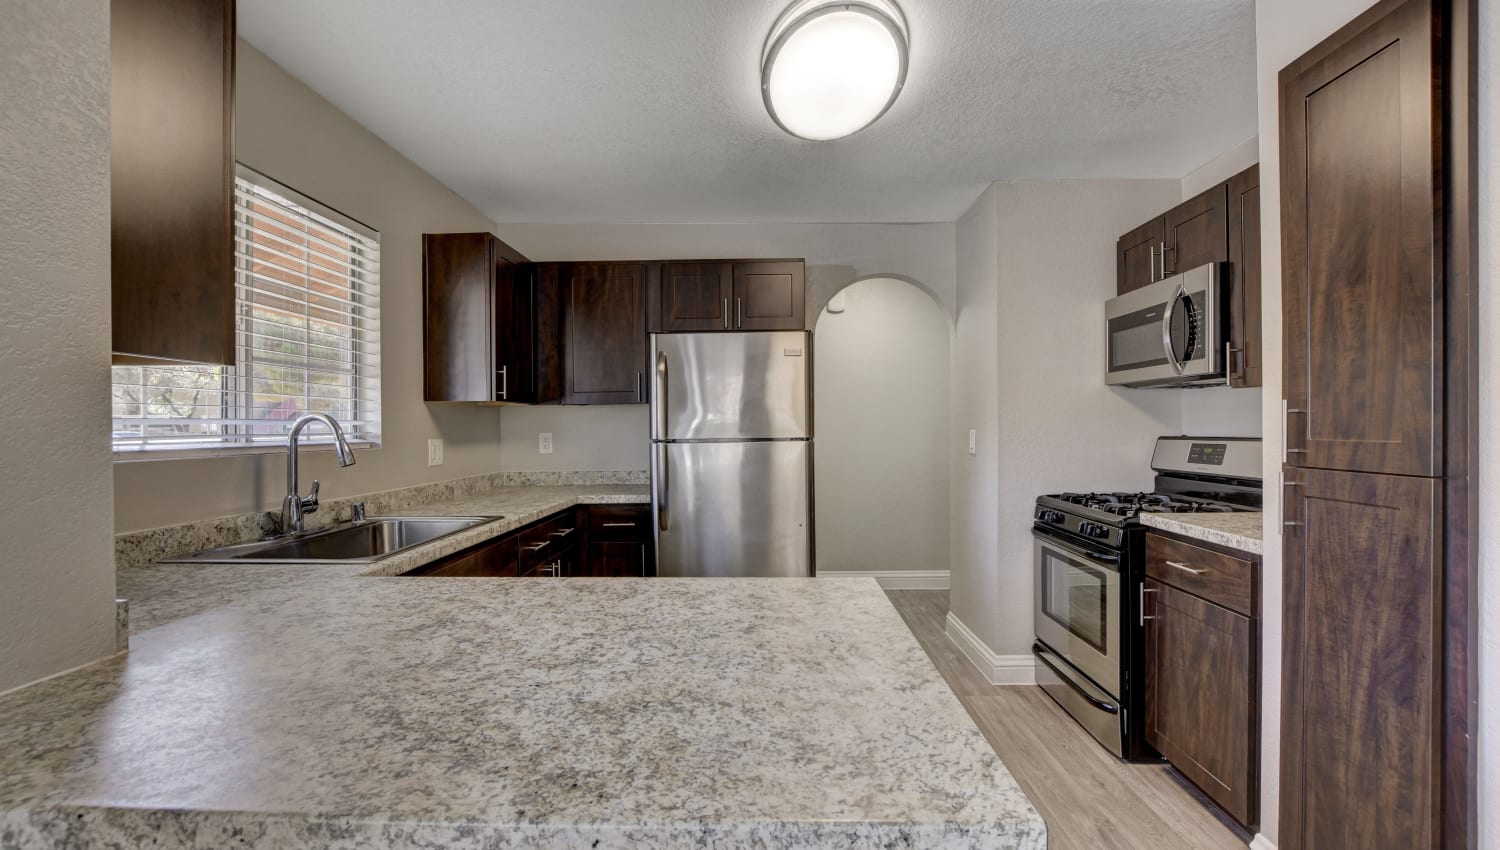 Updated kitchen at Invitational Apartments in Henderson, Nevada